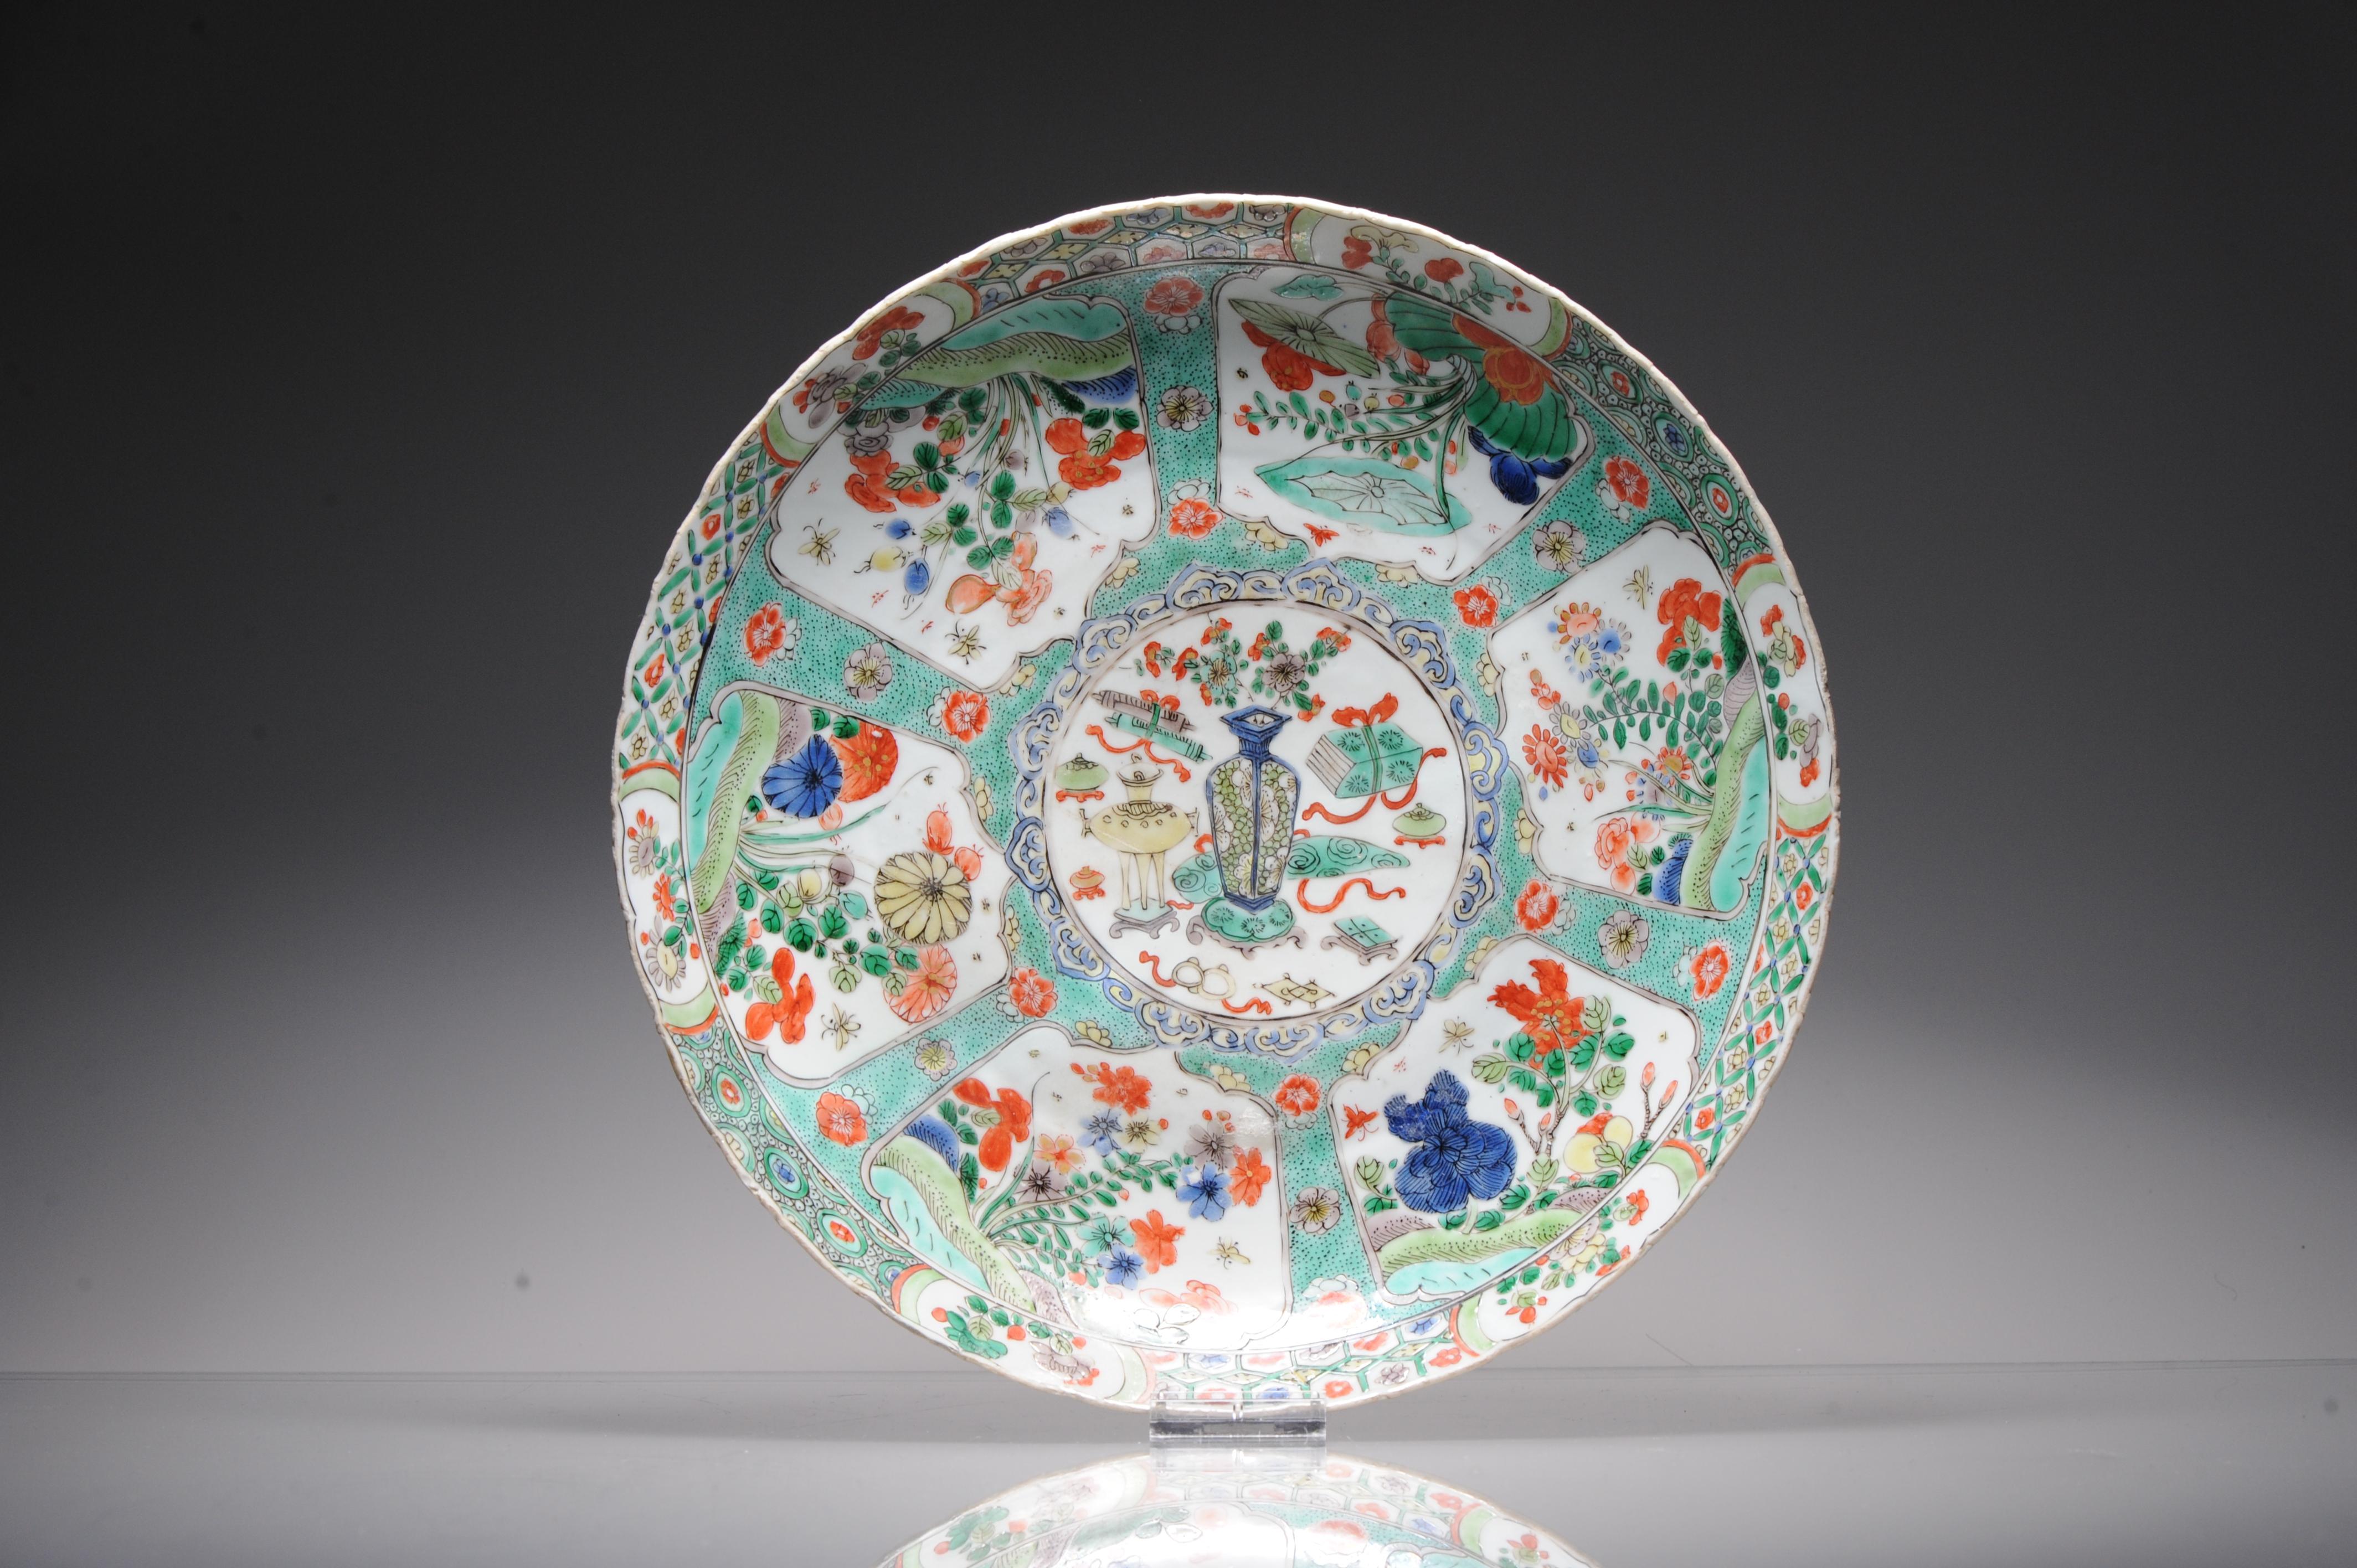 Description

A LARGE 'CHINESE VERTE' EXPORT PORCELAIN DEEP DISH
Kangxi period
Painted with enamels of the famille verte palette with reserves of flowers, Trees and in the centre a flower basket and various objects. The exterior walls with